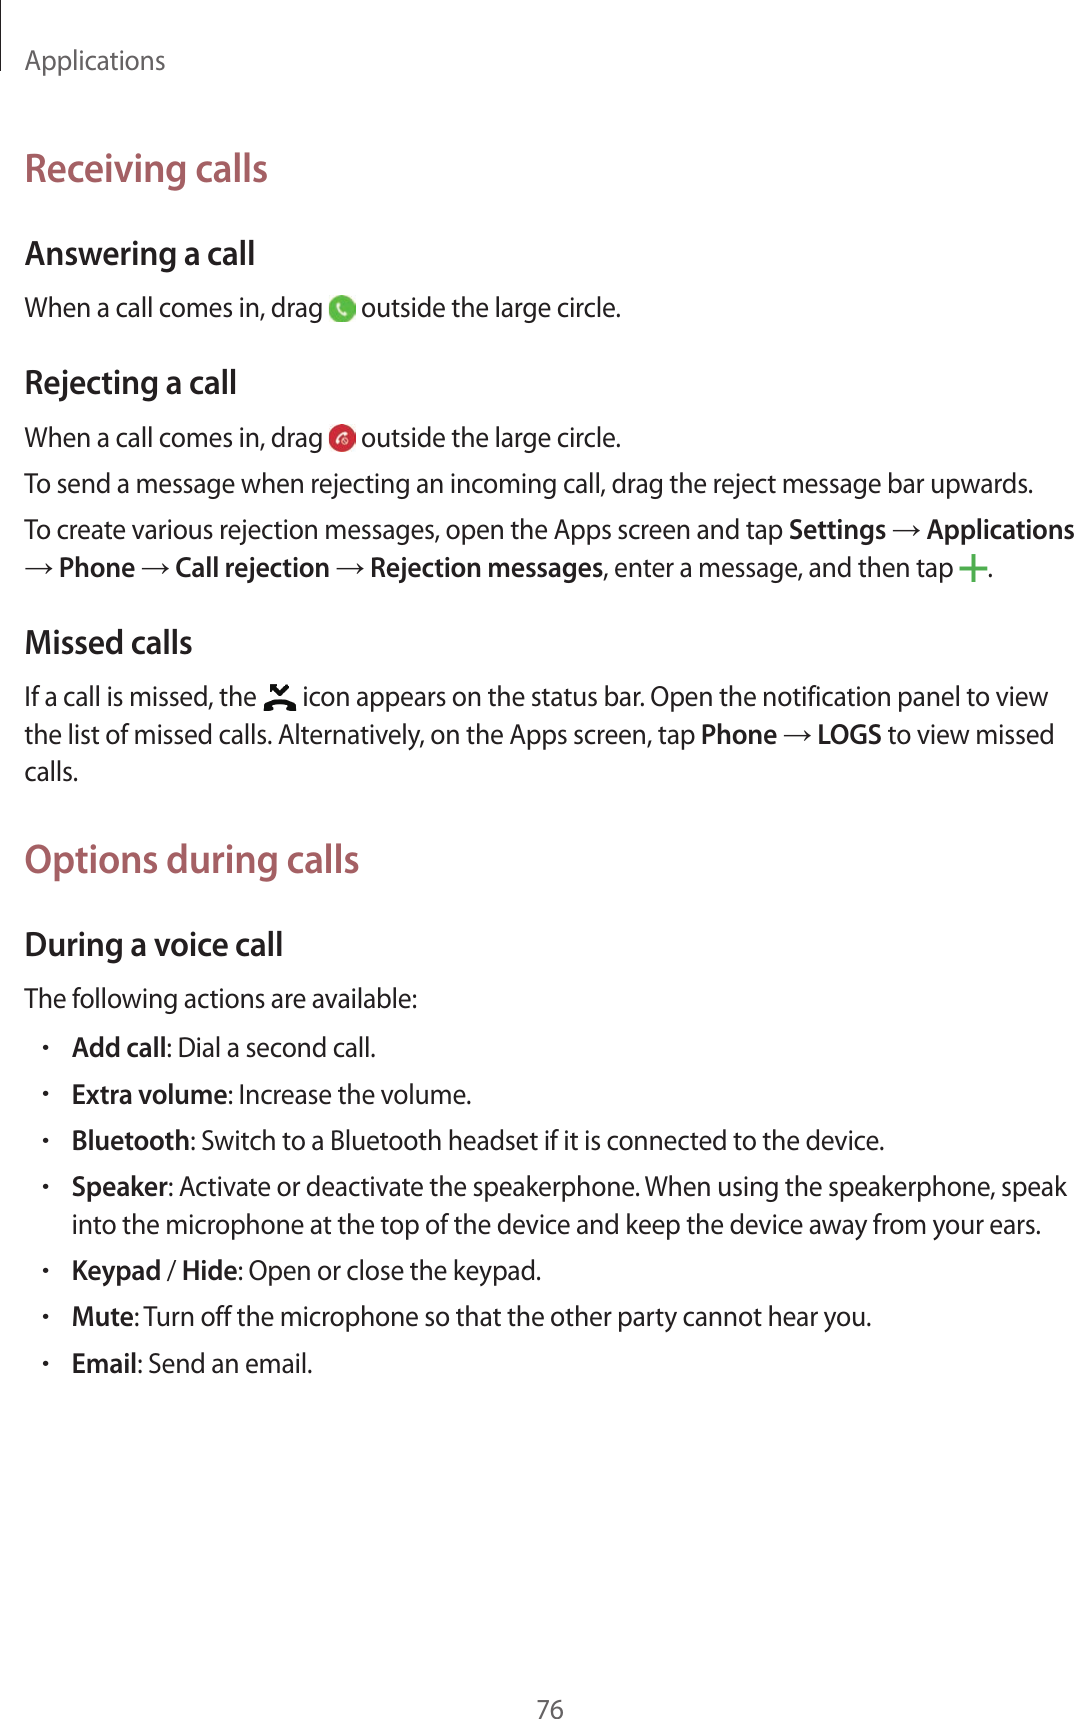 Applications76Receiving callsAnsw ering a callWhen a call comes in, drag   outside the large cir cle .Rejecting a callWhen a call comes in, drag   outside the large cir cle .To send a message when rejecting an incoming call, dr ag the r eject message bar upwards .To creat e various r ejection messages, open the Apps scr een and tap Settings  Applications  Phone  Call r ejection  Rejection messages, enter a message , and then tap  .Missed callsIf a call is missed, the   icon appears on the status bar. Open the notification panel t o view the list of missed calls. Alt ernativ ely, on the Apps scr een, tap Phone  LOGS to view missed calls.Options during callsDuring a voic e callThe f ollowing actions are a vailable:•Add call: Dial a second call.•Extra volume: Increase the volume .•Bluetooth: Switch t o a Bluetooth headset if it is c onnected to the device.•Speaker: Activate or deactivate the speakerphone . When using the speakerphone , speak into the micr ophone at the t op of the device and keep the devic e a wa y fr om y our ears .•Keypad / Hide: Open or close the keypad.•Mute: Turn off the microphone so tha t the other party cannot hear you.•Email: Send an email.